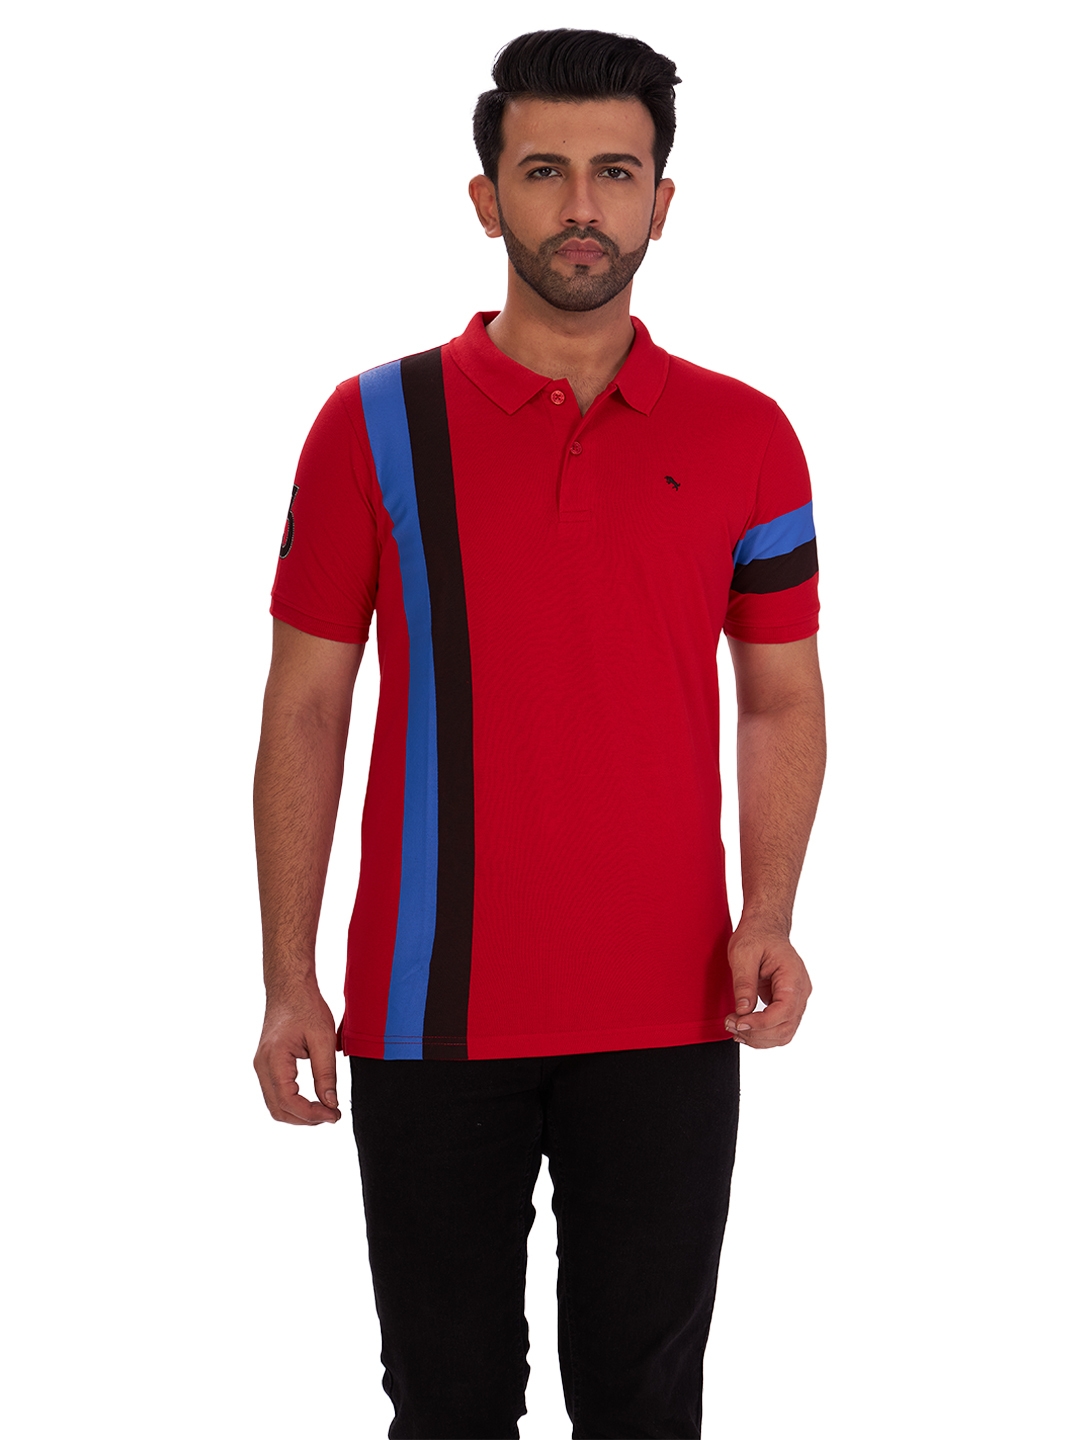 D'cot by Donear Men's Red Cotton T-Shirts